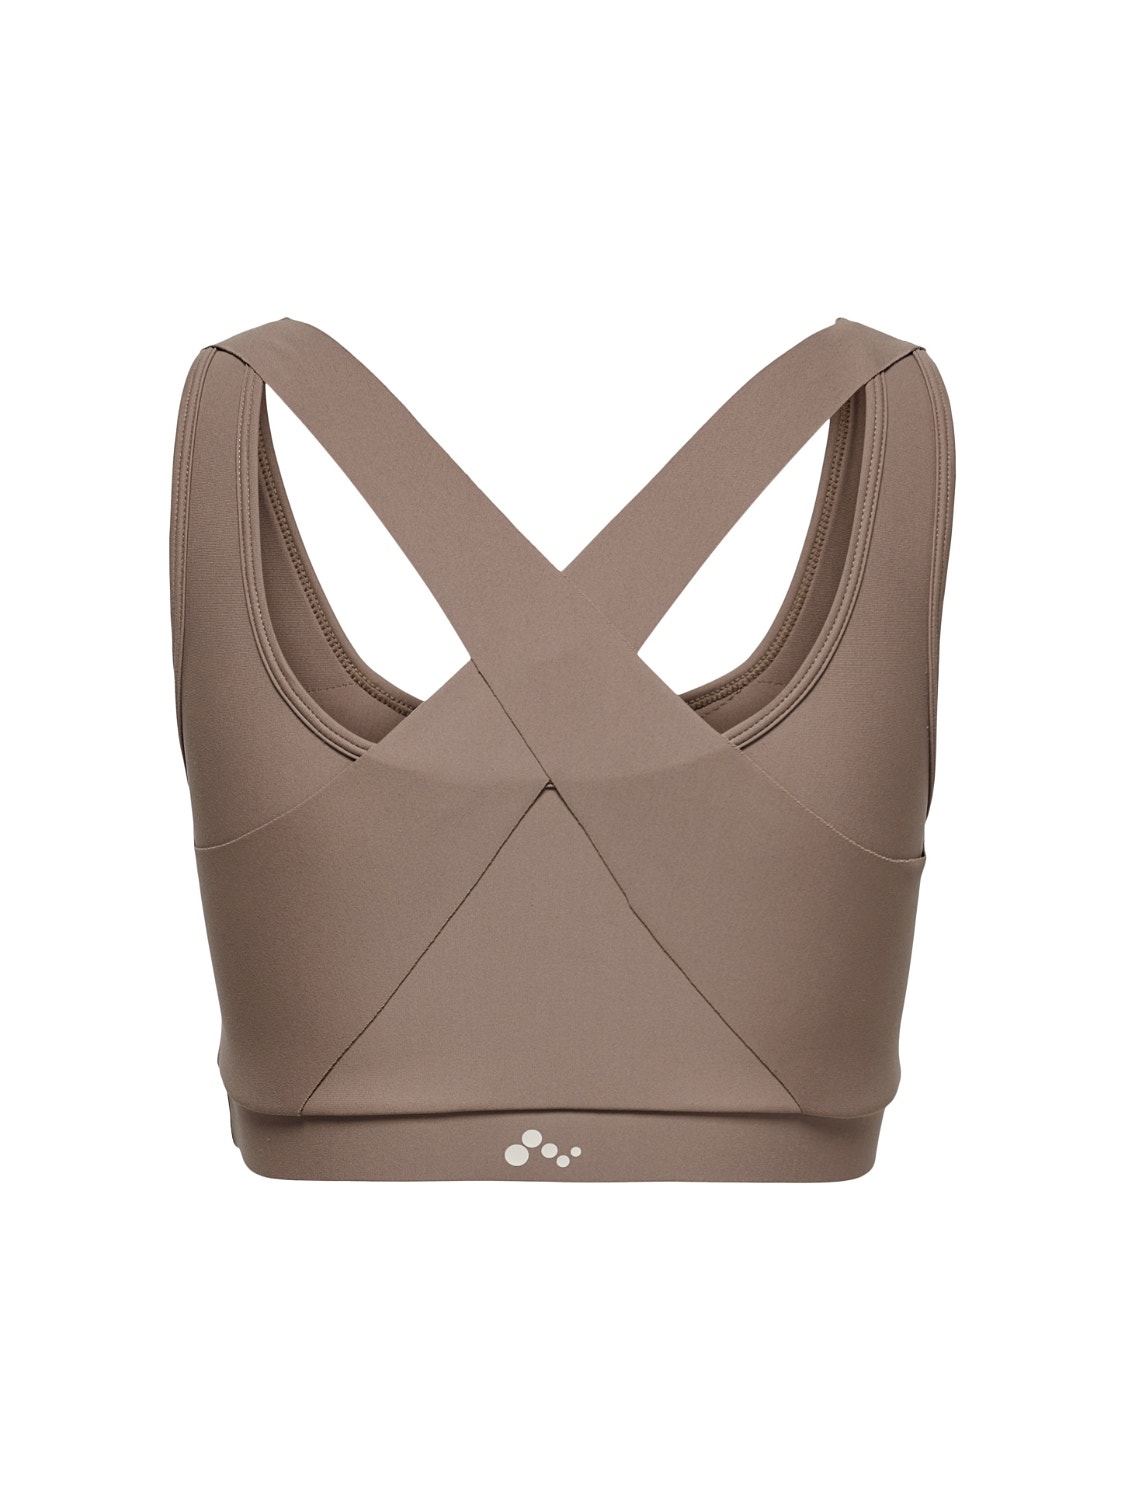 ONLY Sports Bra with medium support -Nutmeg - 15244807